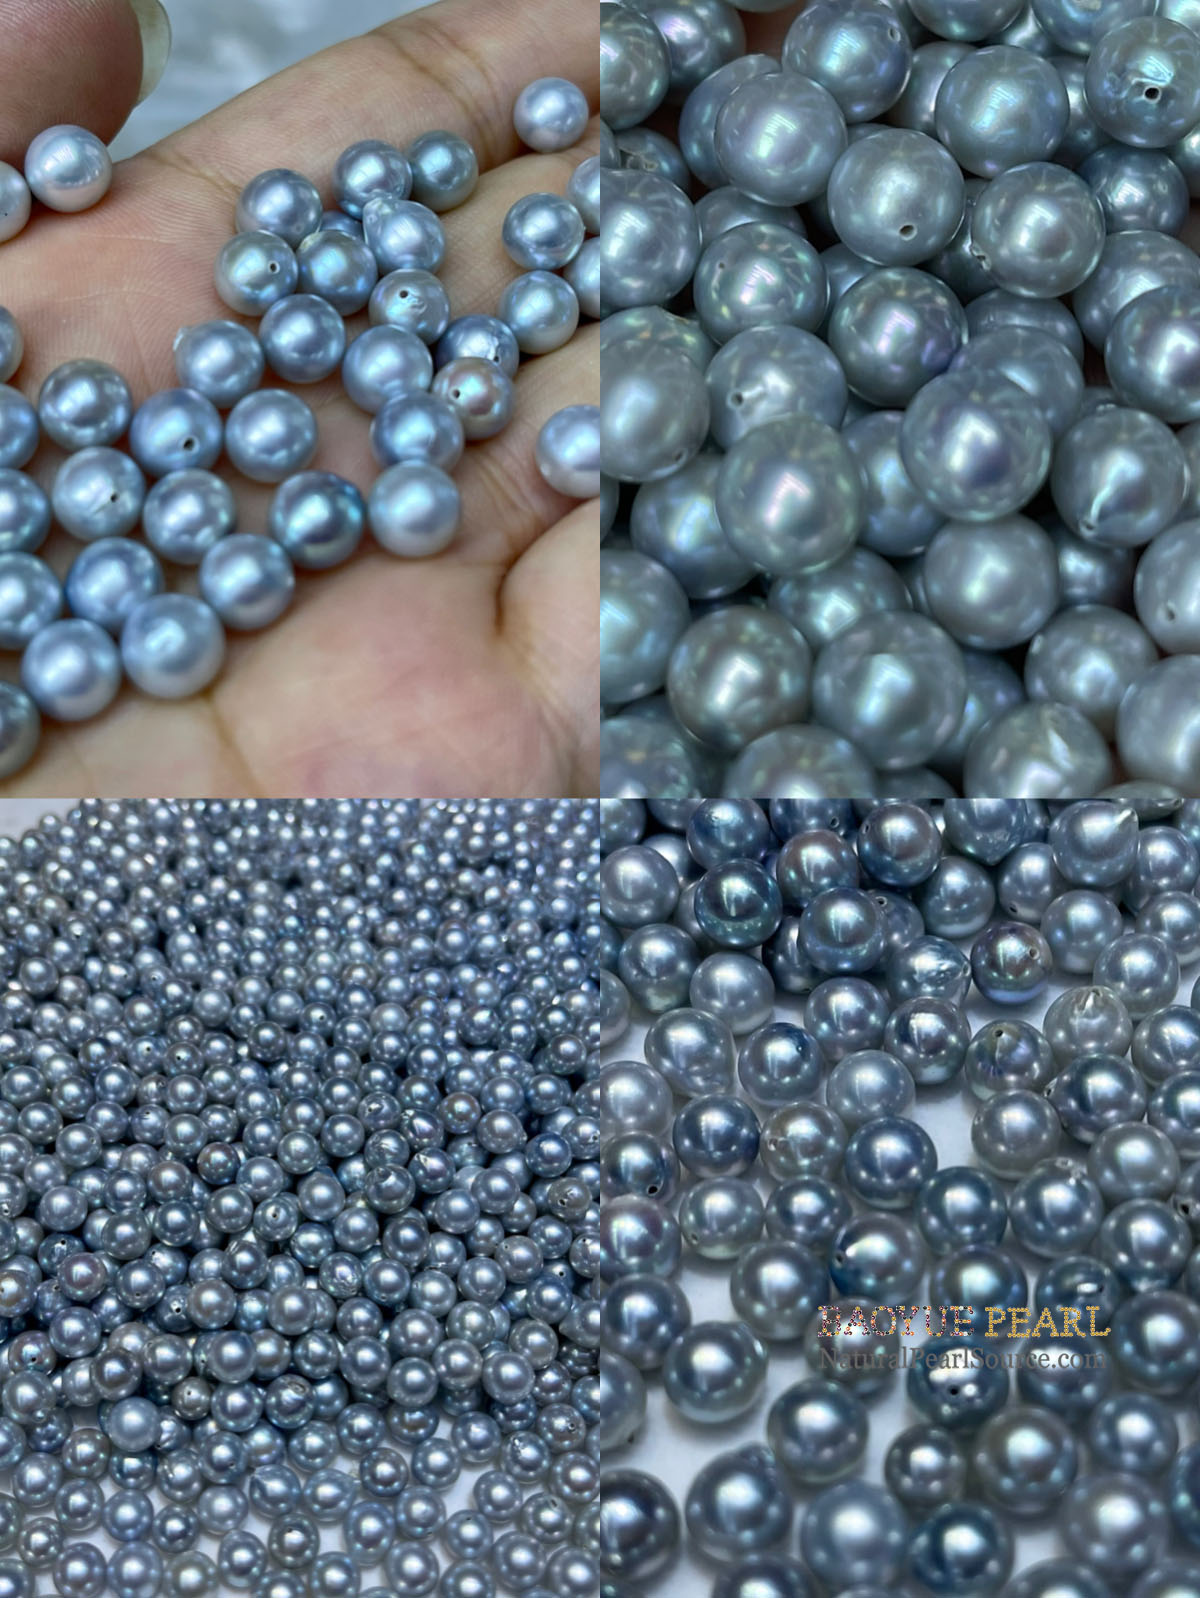 6.5-7 mm AKOYA pearls wholesale, AA perfect baroque nature loose pearl with half drilled, Natural Akoya pearls loose freshwater pearls with Wholesale Prices